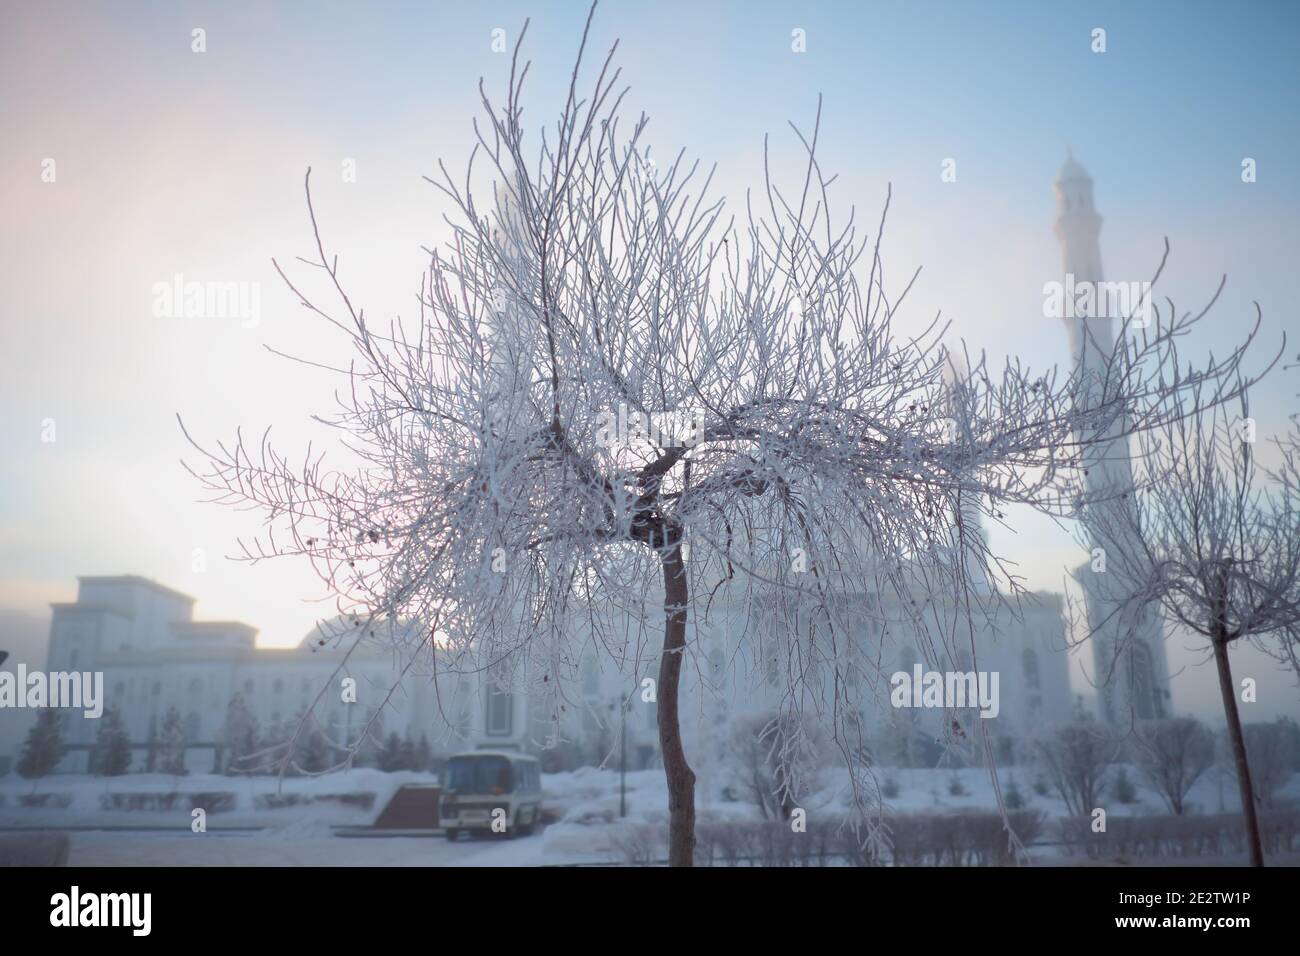 Winter morning in the city. Stock Photo